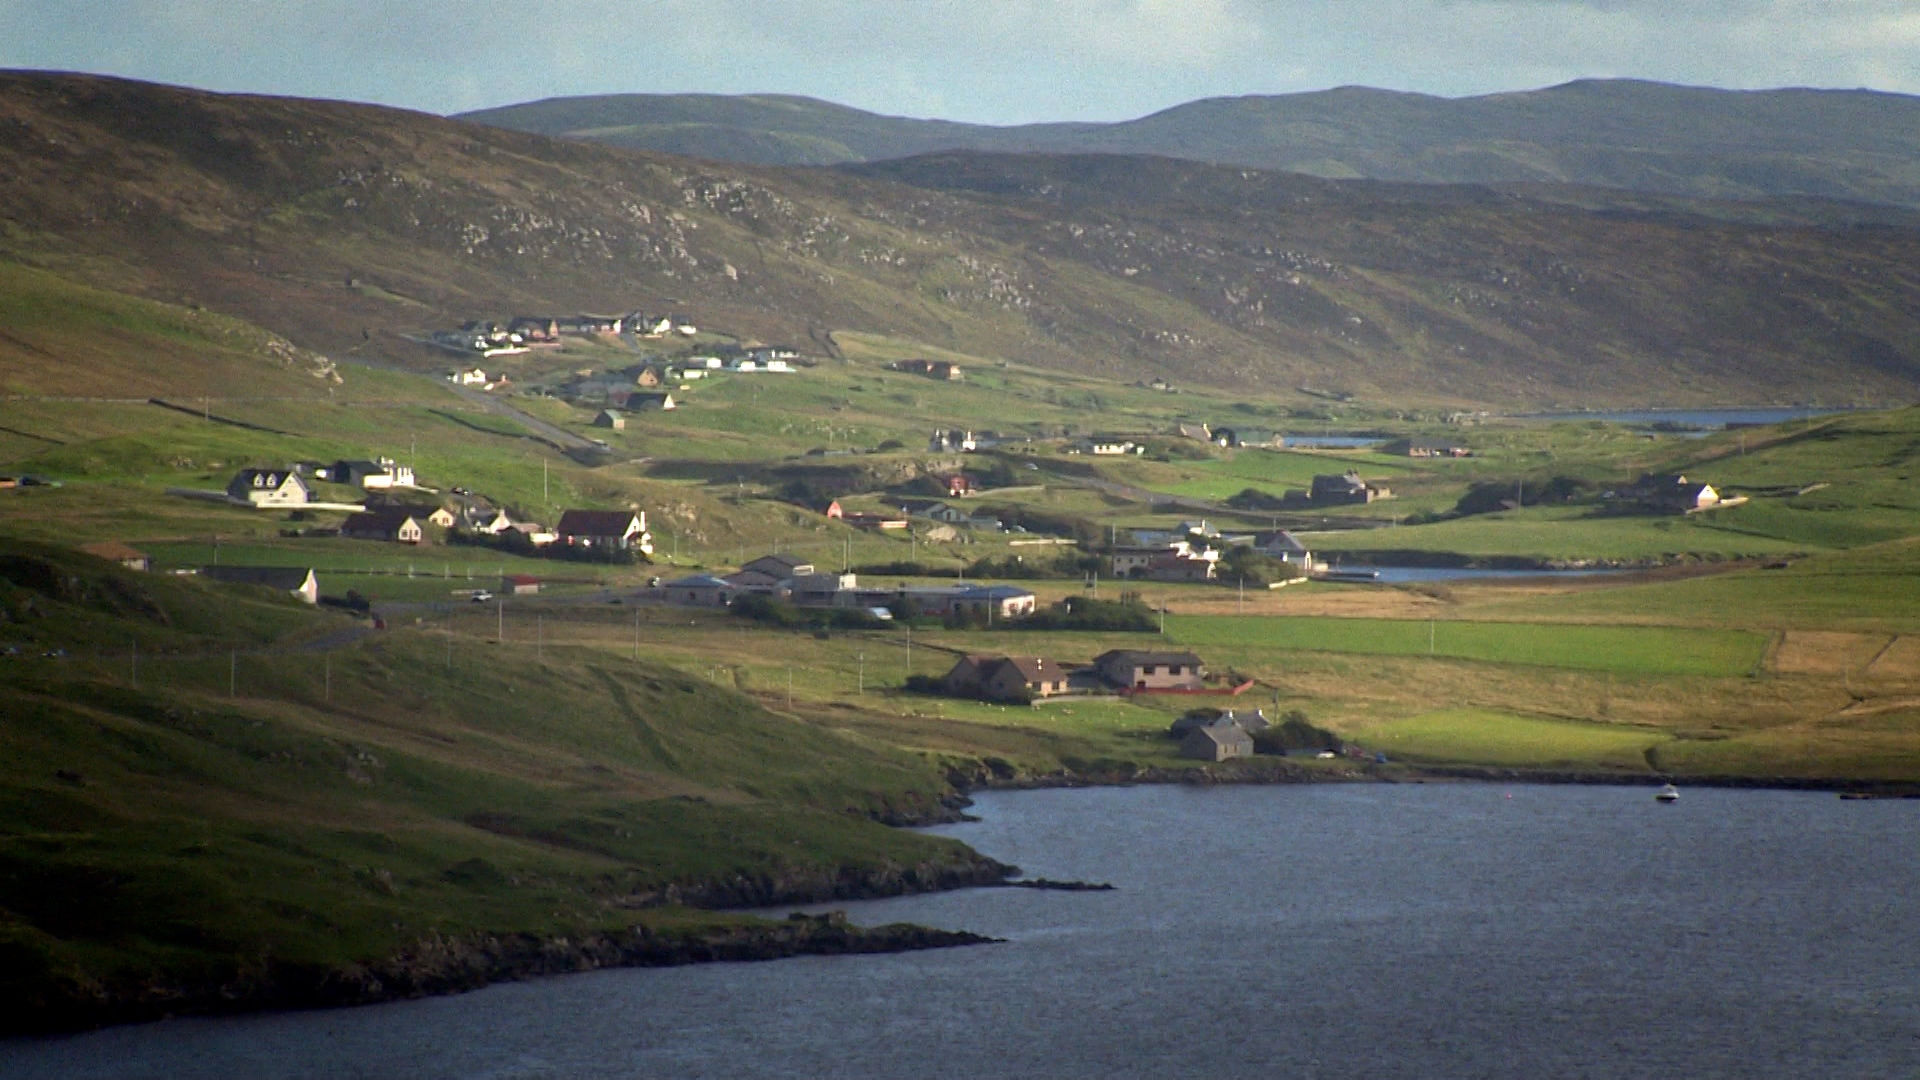 96% of households on Shetland could fall into fuel poverty.